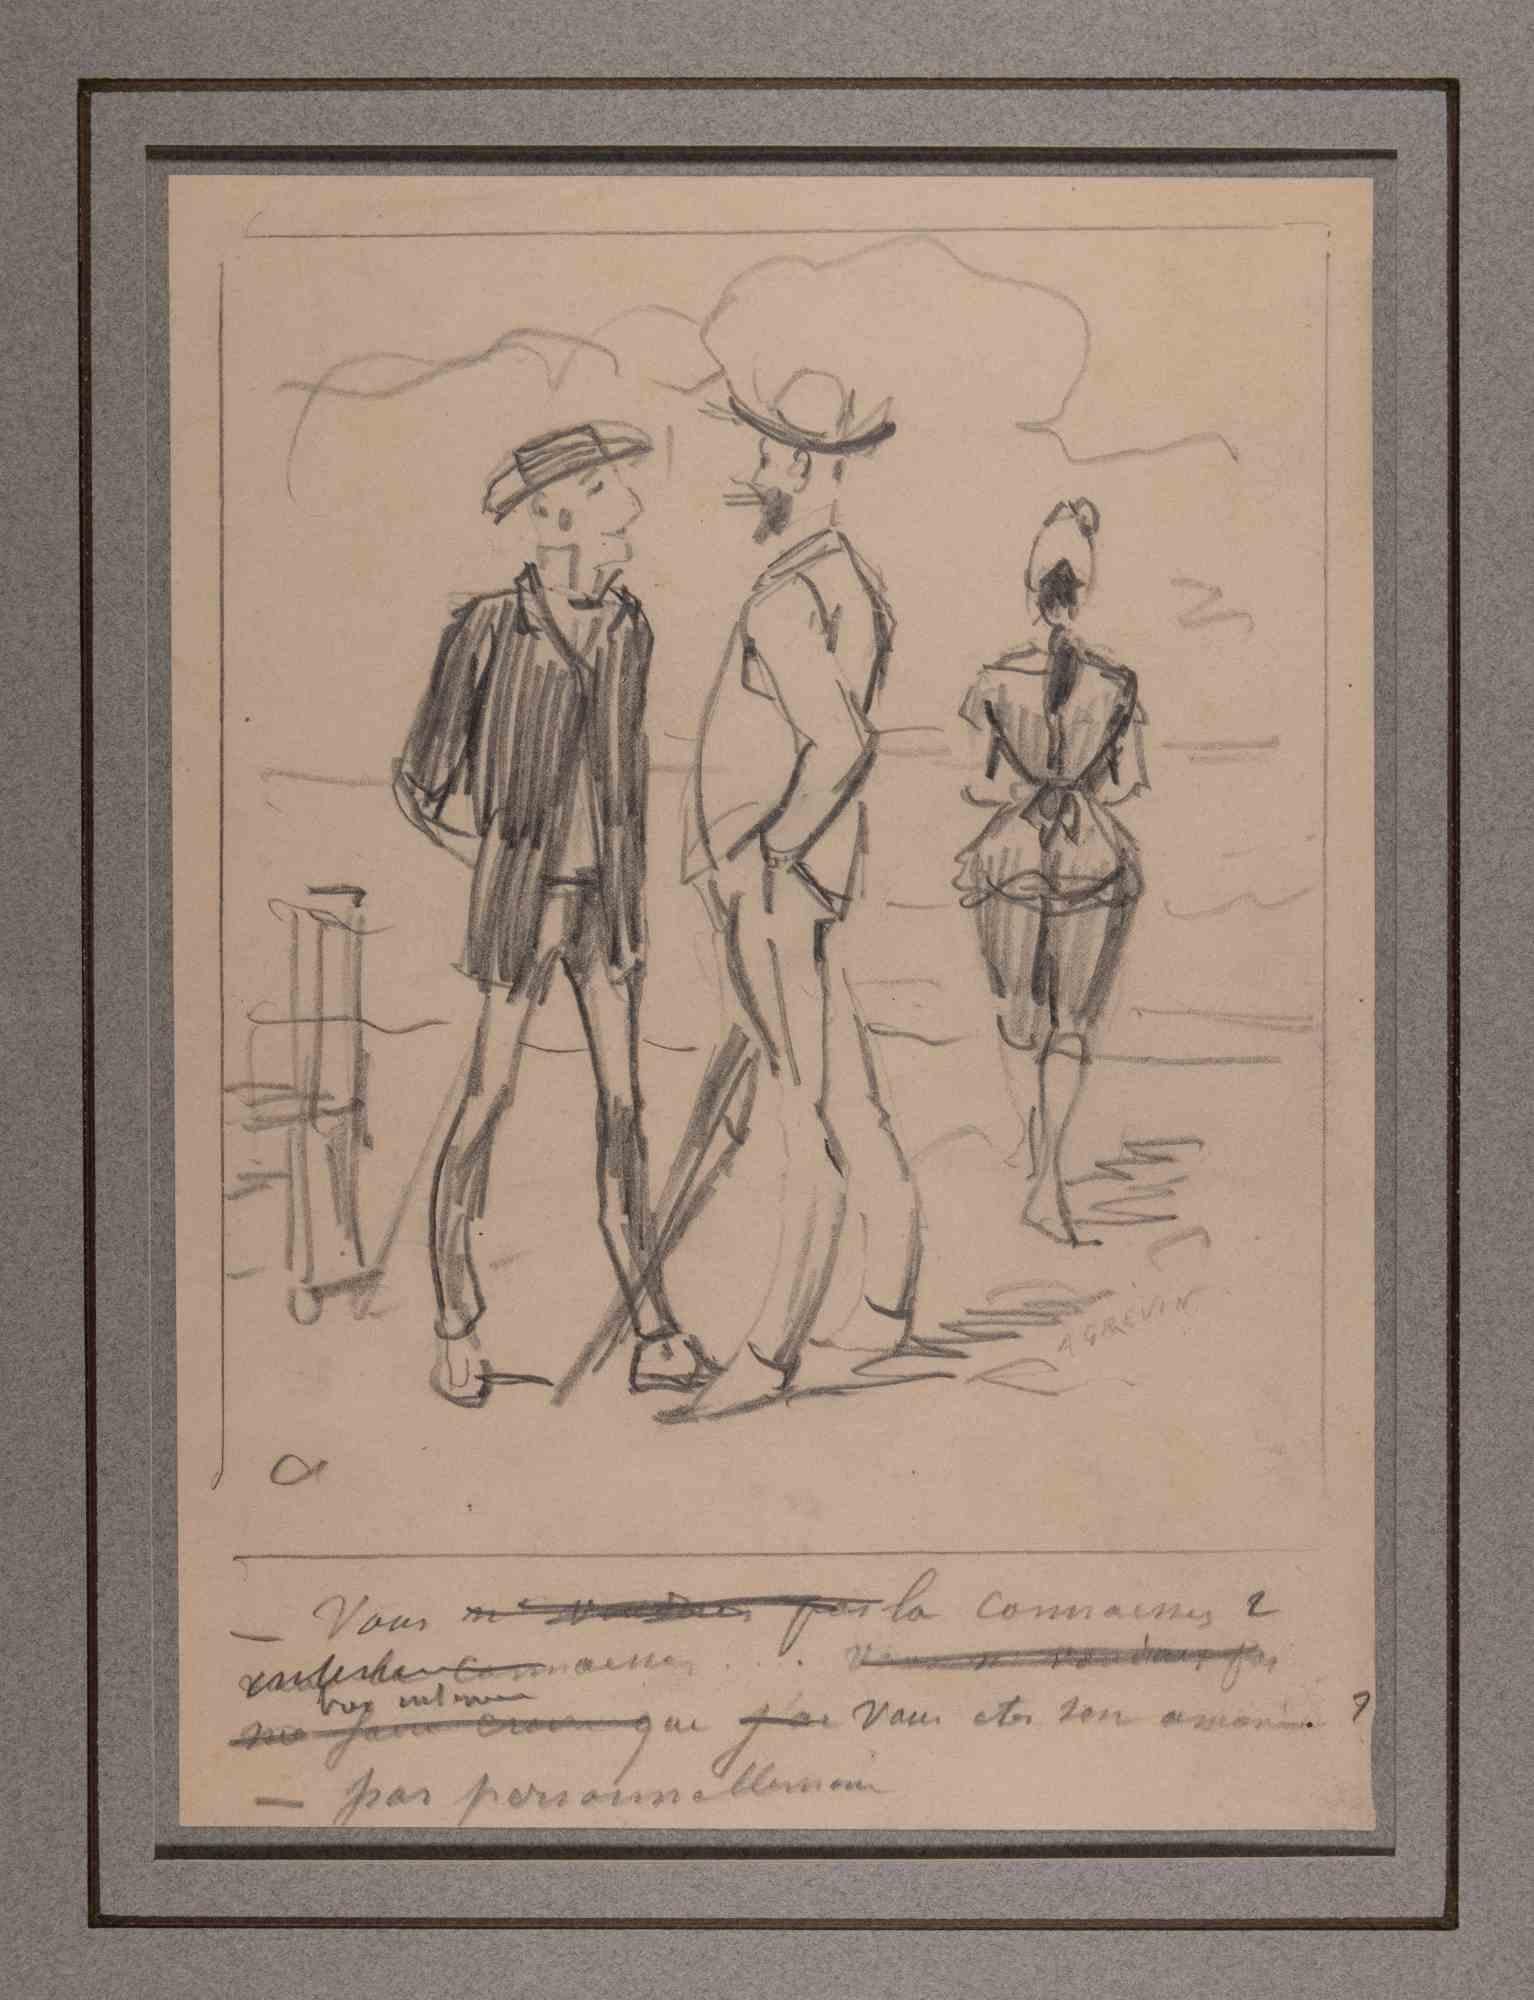 Alfred Grevin Figurative Art - The Swimmers on the Beach- Original Drawing by Alfred Grévin - Late 19th century